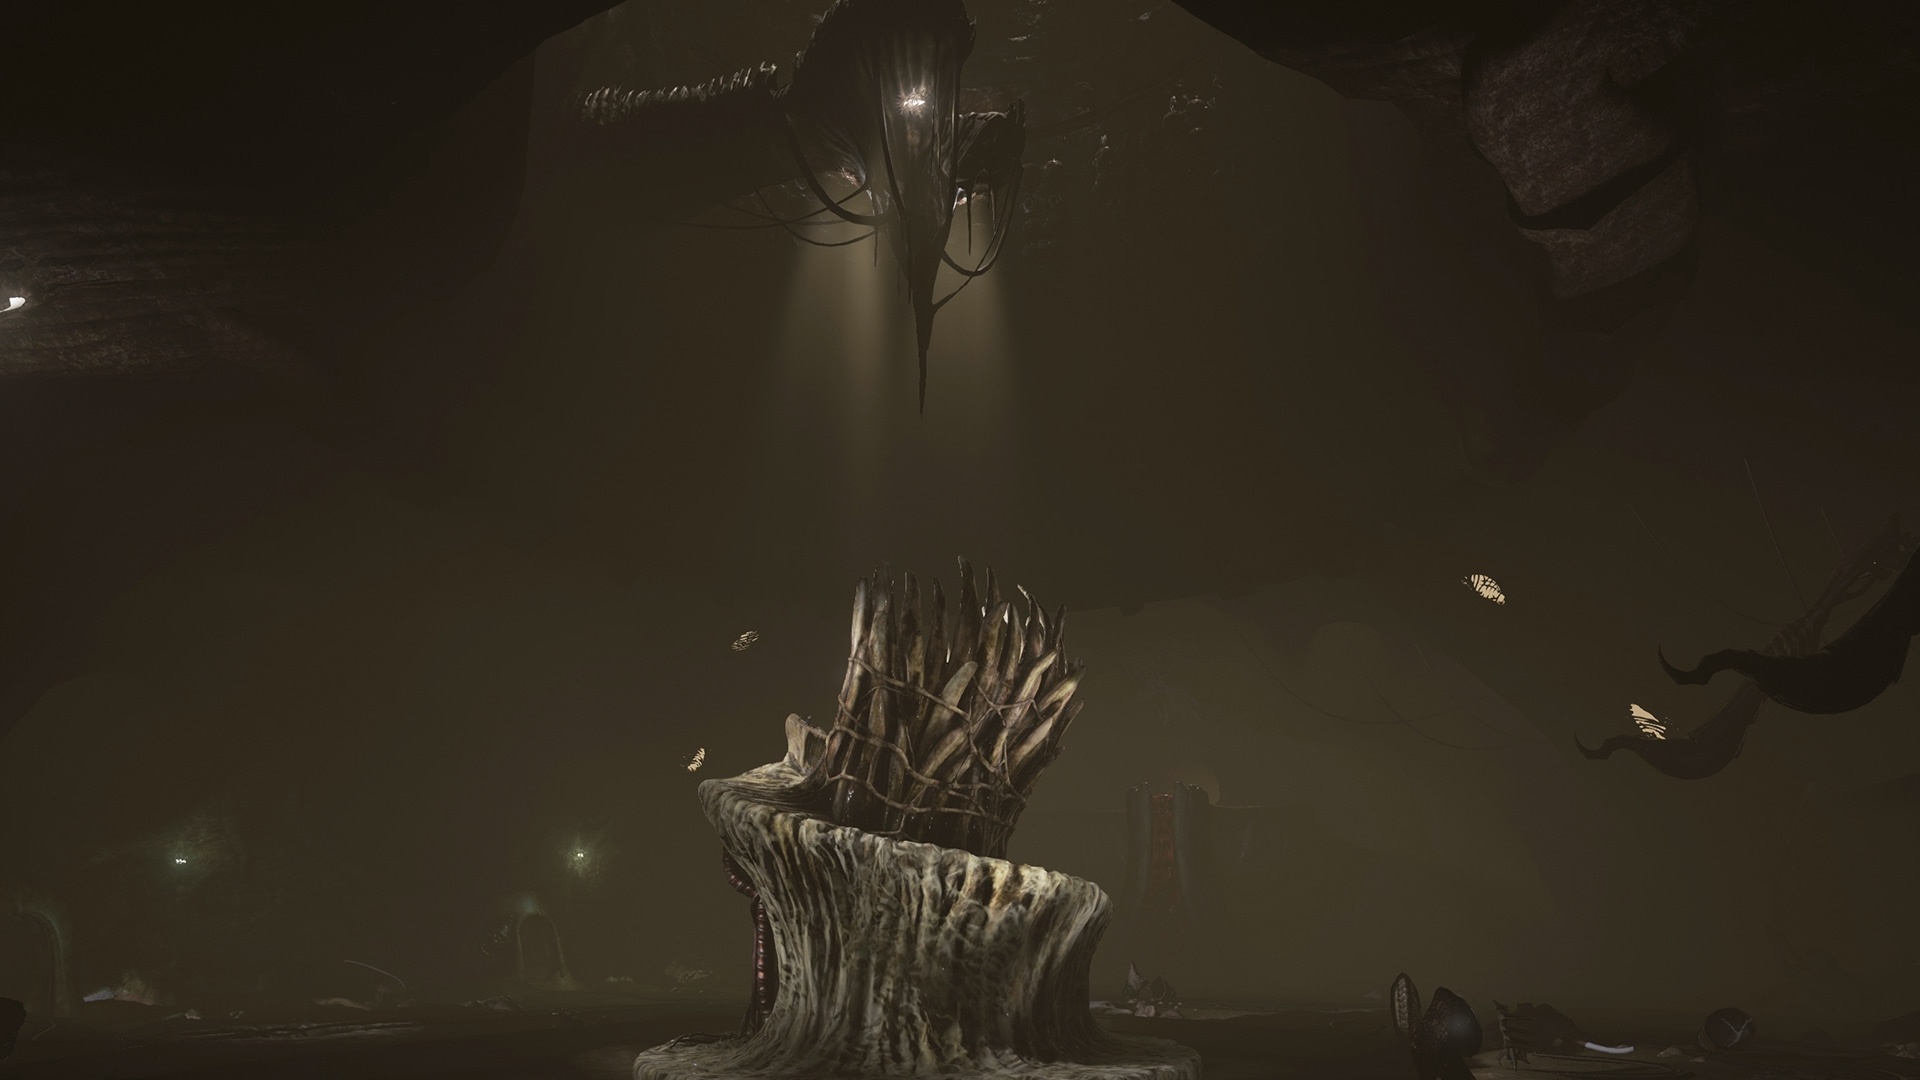 Scorn (Game): Ebb software studio, H.R Giger sculptures brought to the screen, Visual storytelling. 1920x1080 Full HD Background.